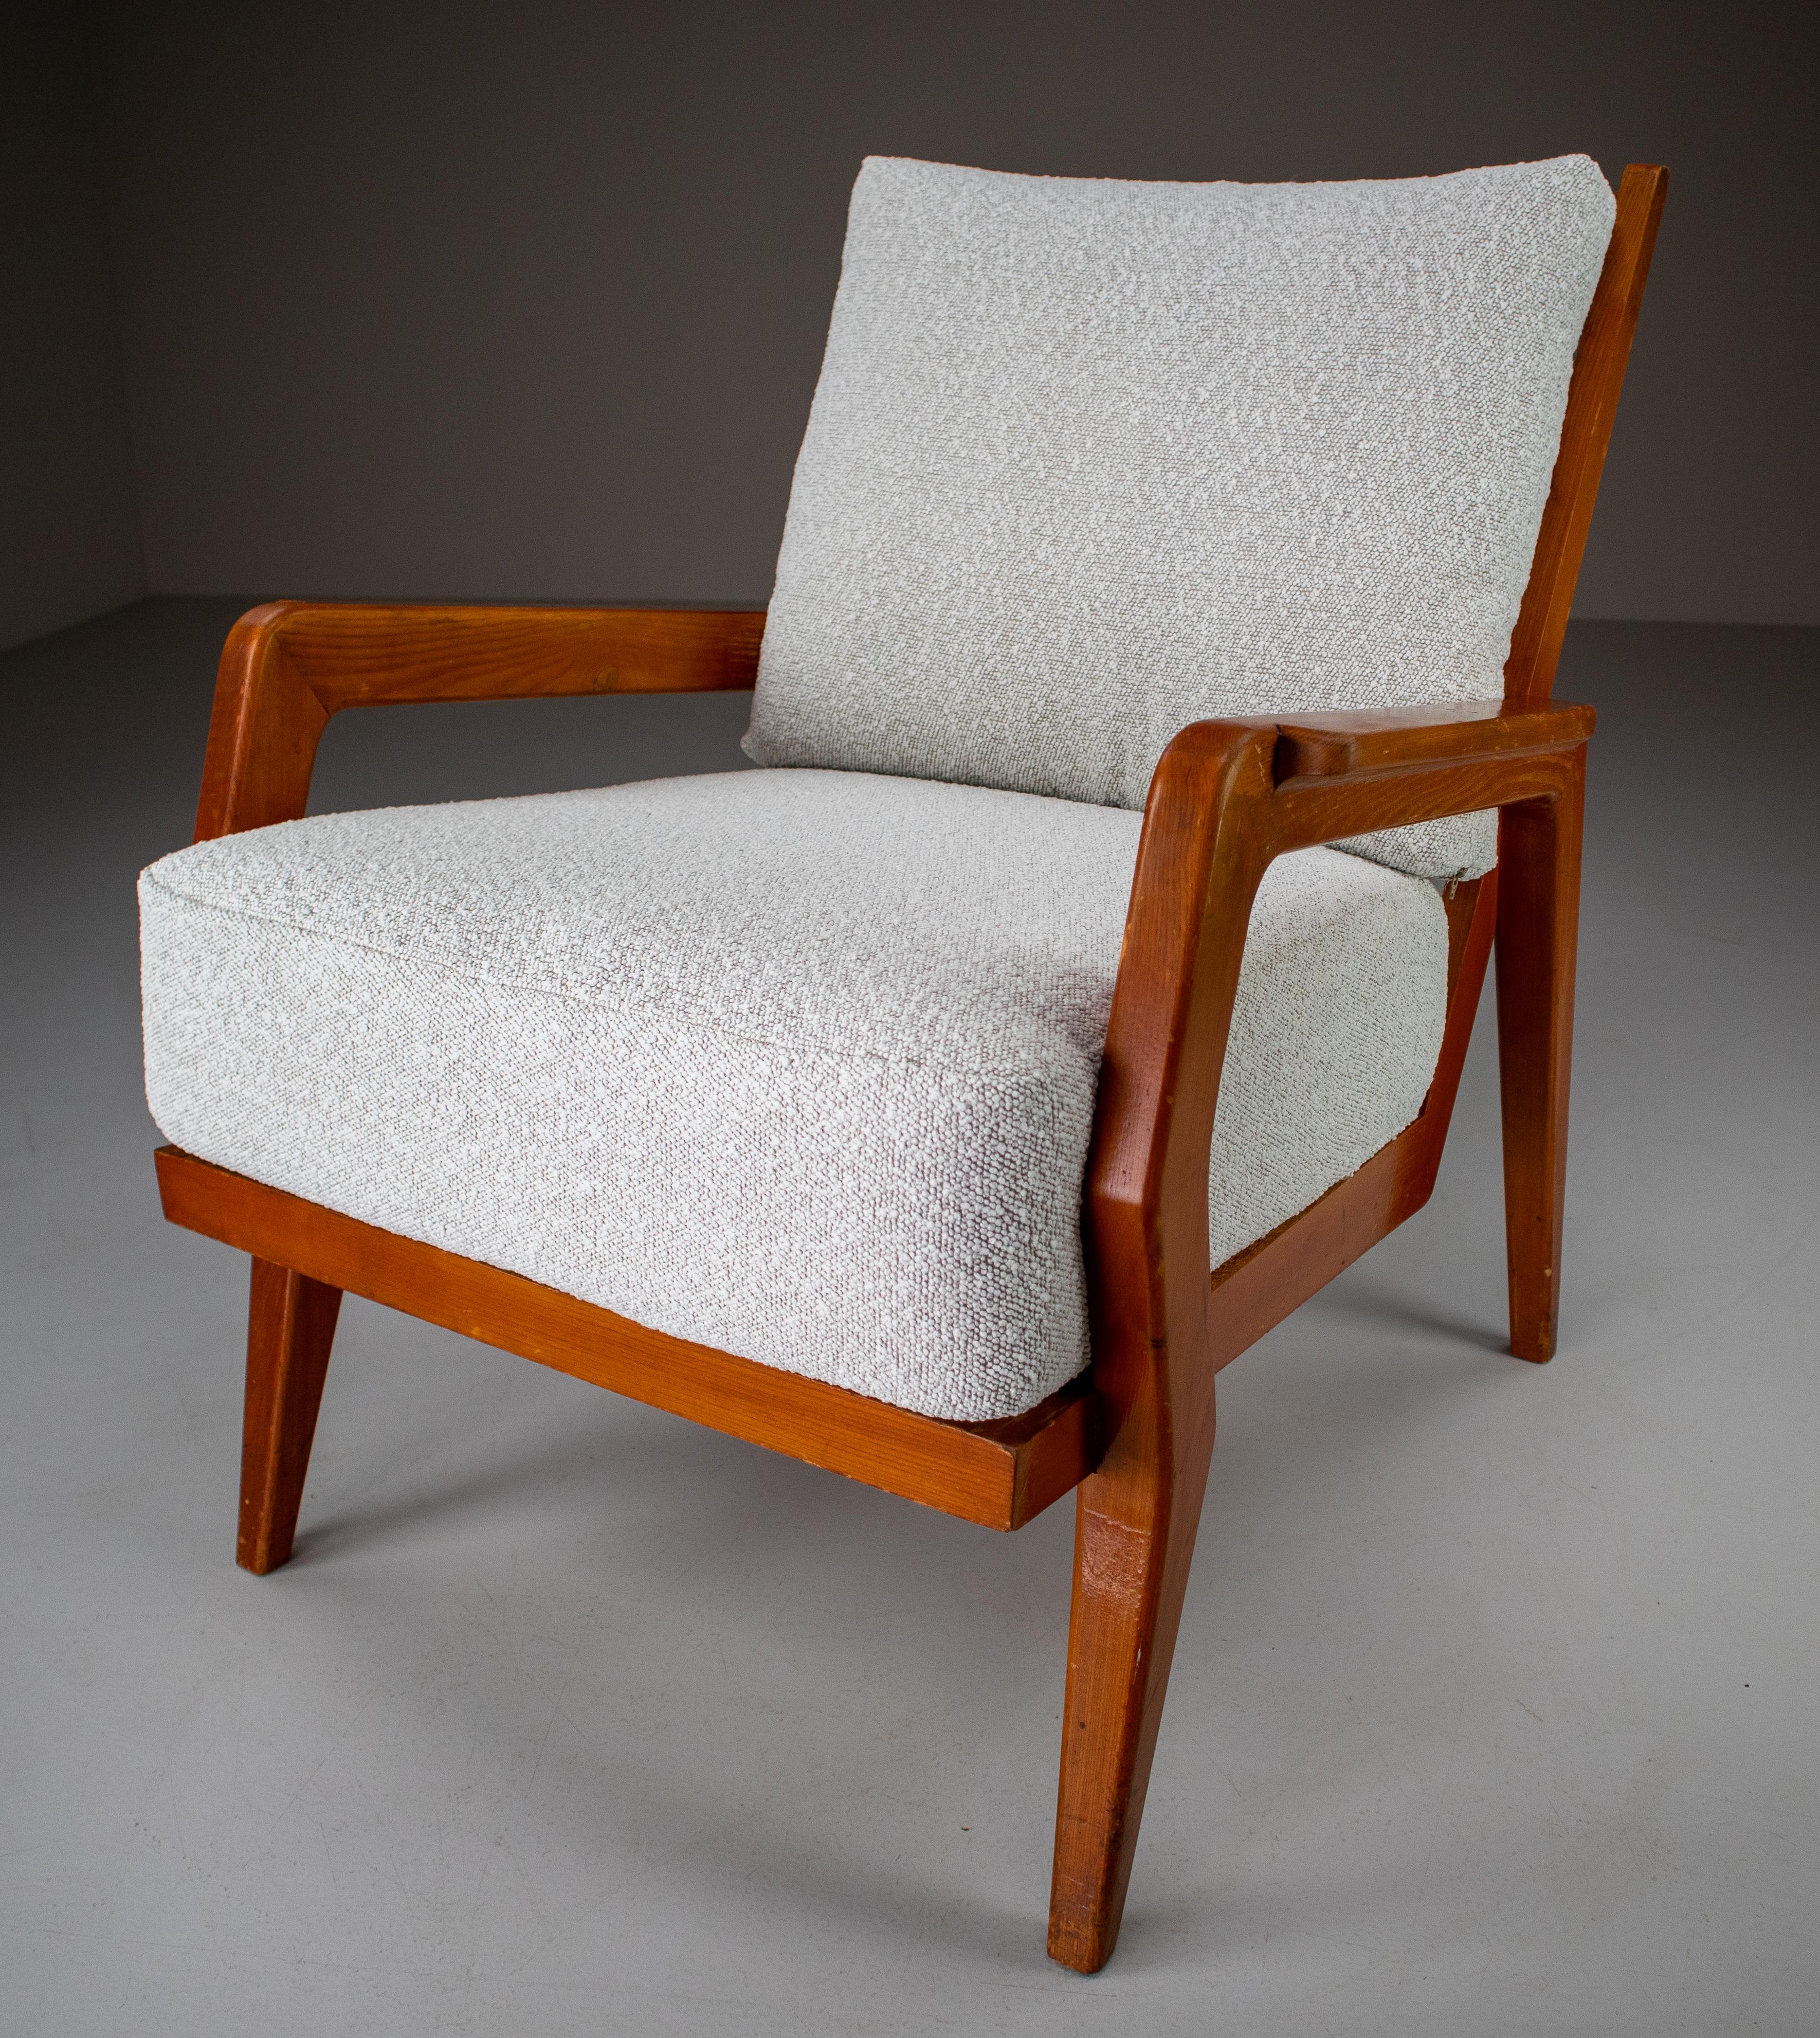 20th Century Midcentury Armchairs in Ash and Reupholstered in Boucle Fabric, France, 1950s